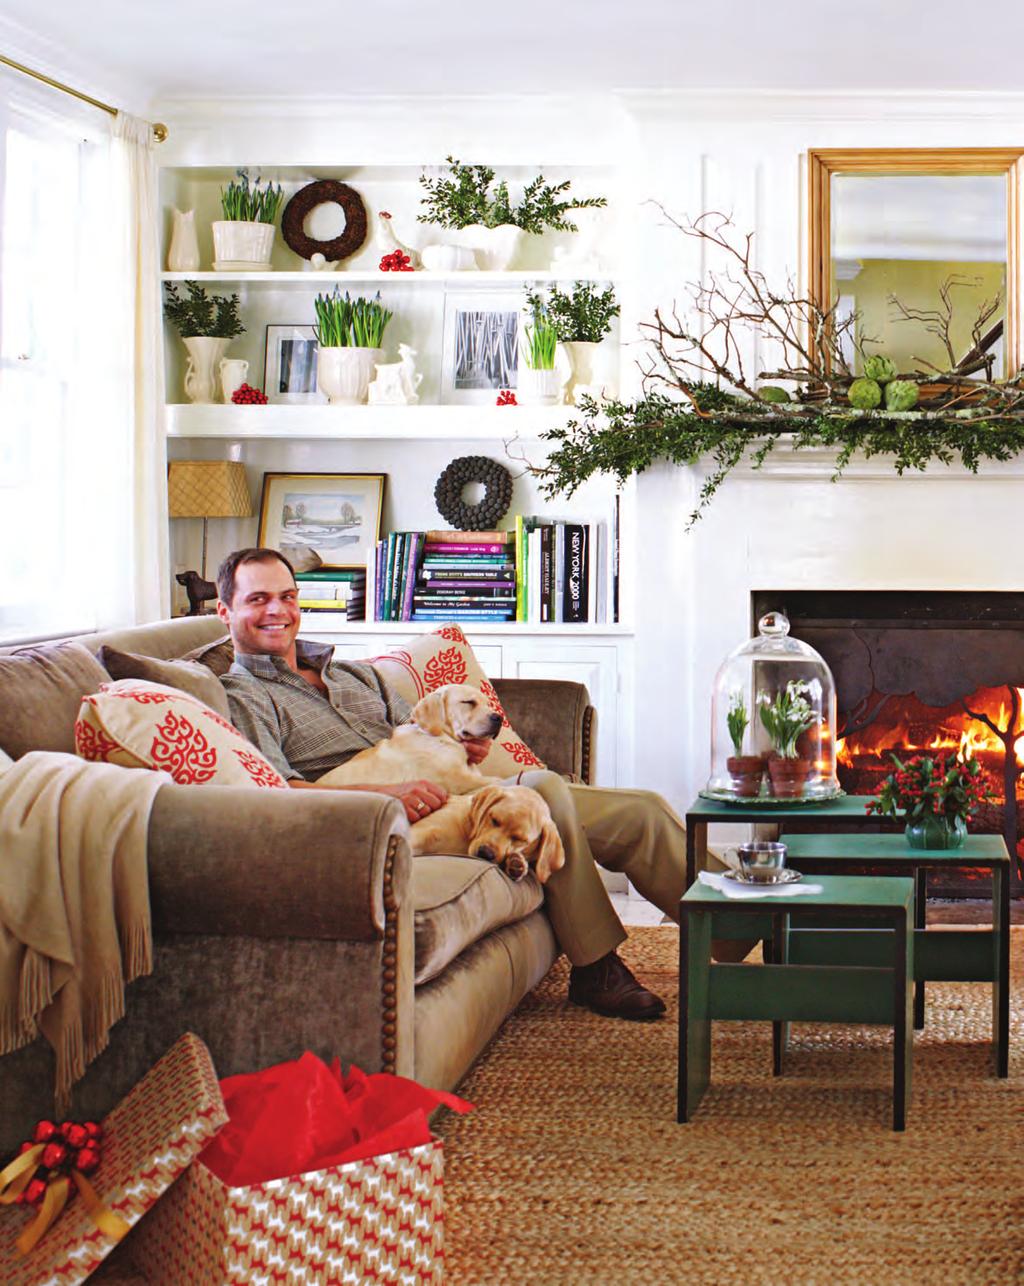 Tucked into the living room built-ins, wreath forms studded with cinnamon sticks and star anise scent the air of Jon s Pennsylvania farmhouse.